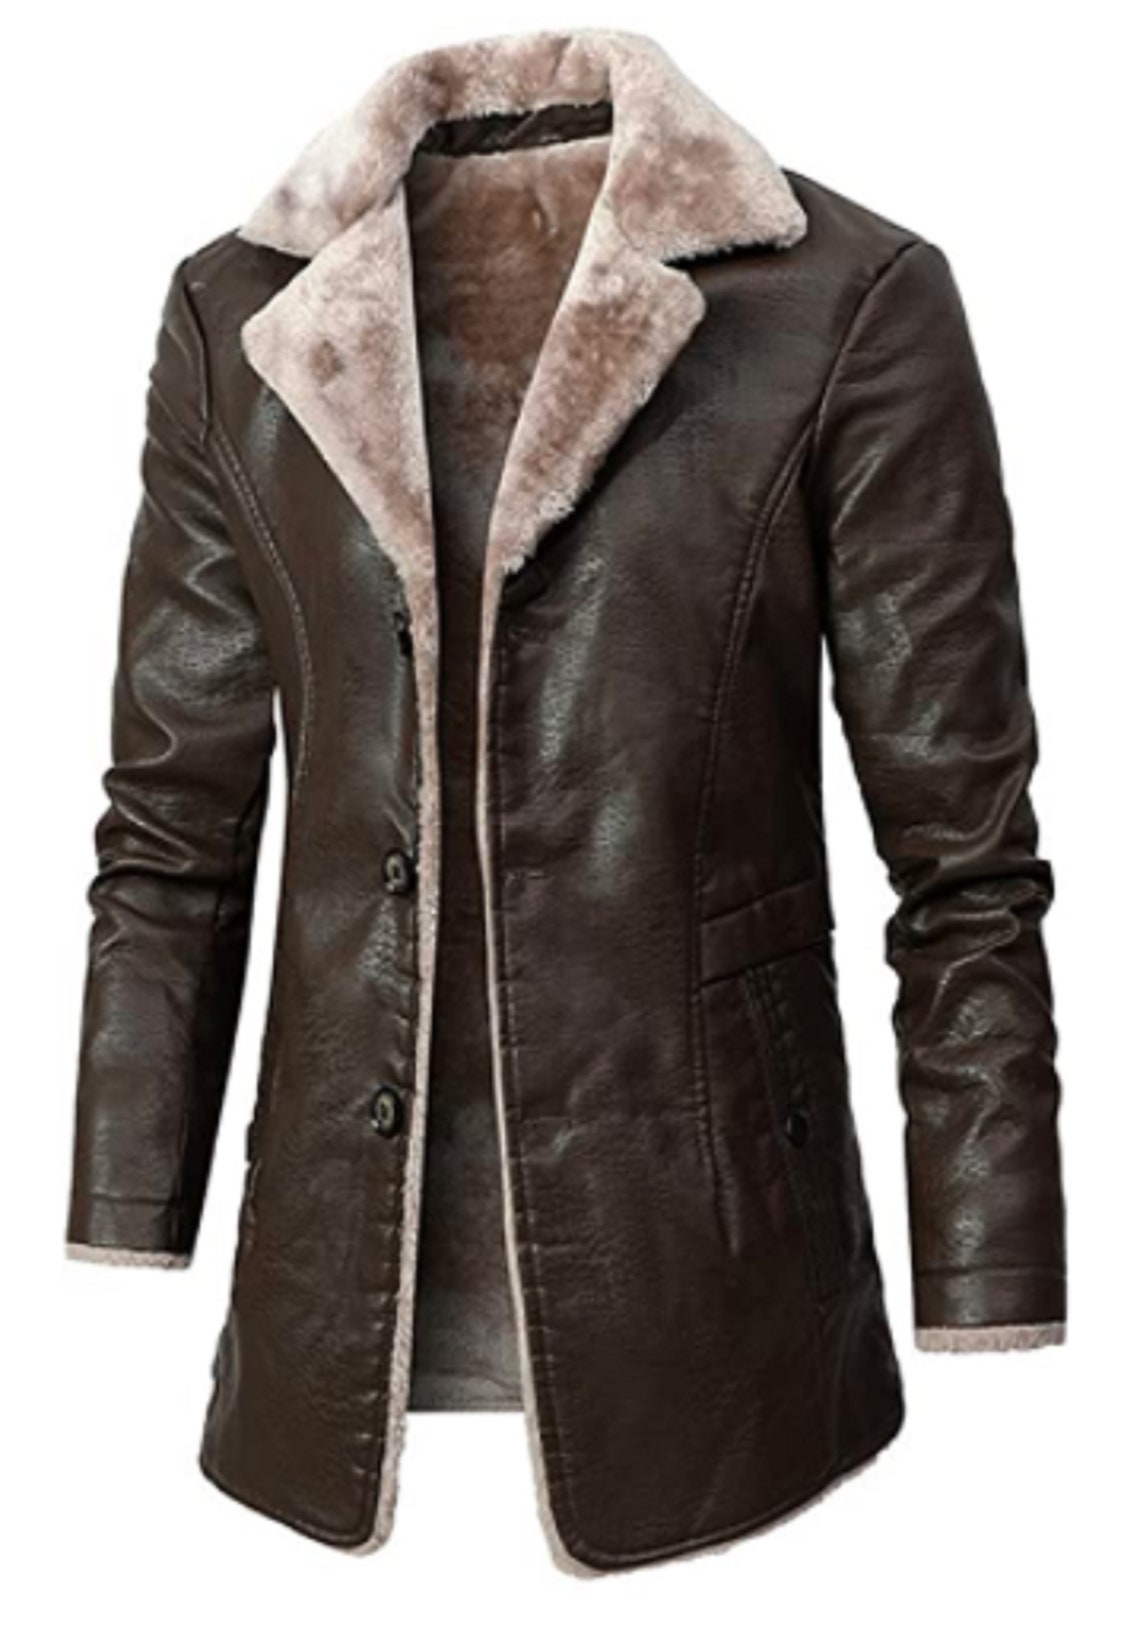 Men's Real Leather Jacket Thick Fur Shearling Lapel Collar - Etsy